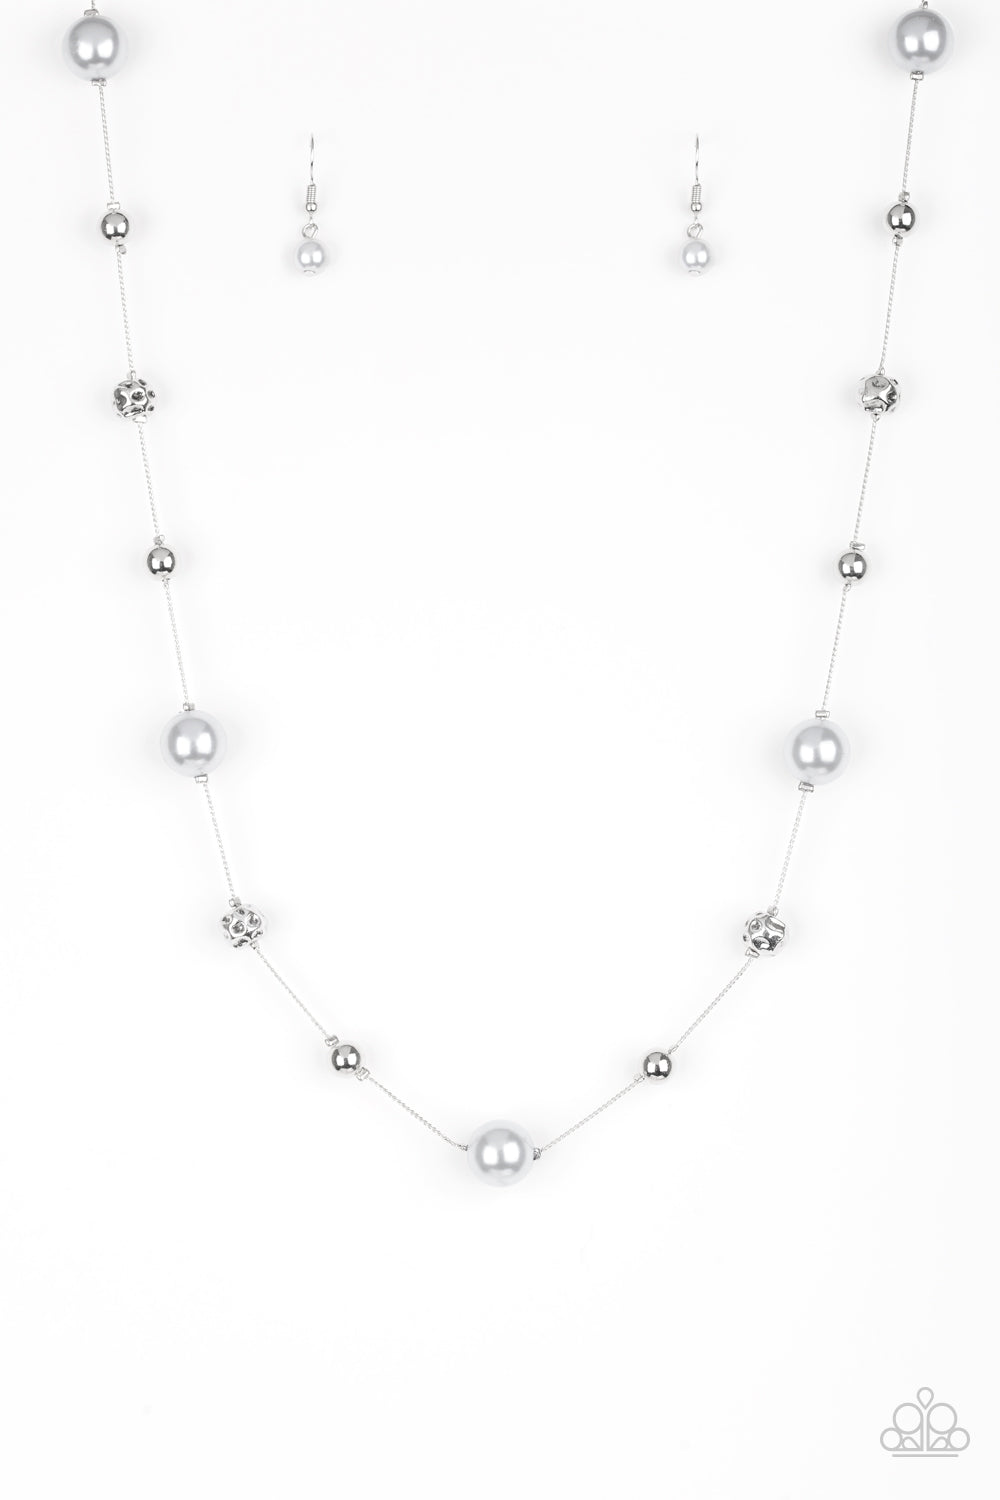 Eloquently Eloquent Necklace__SIlver